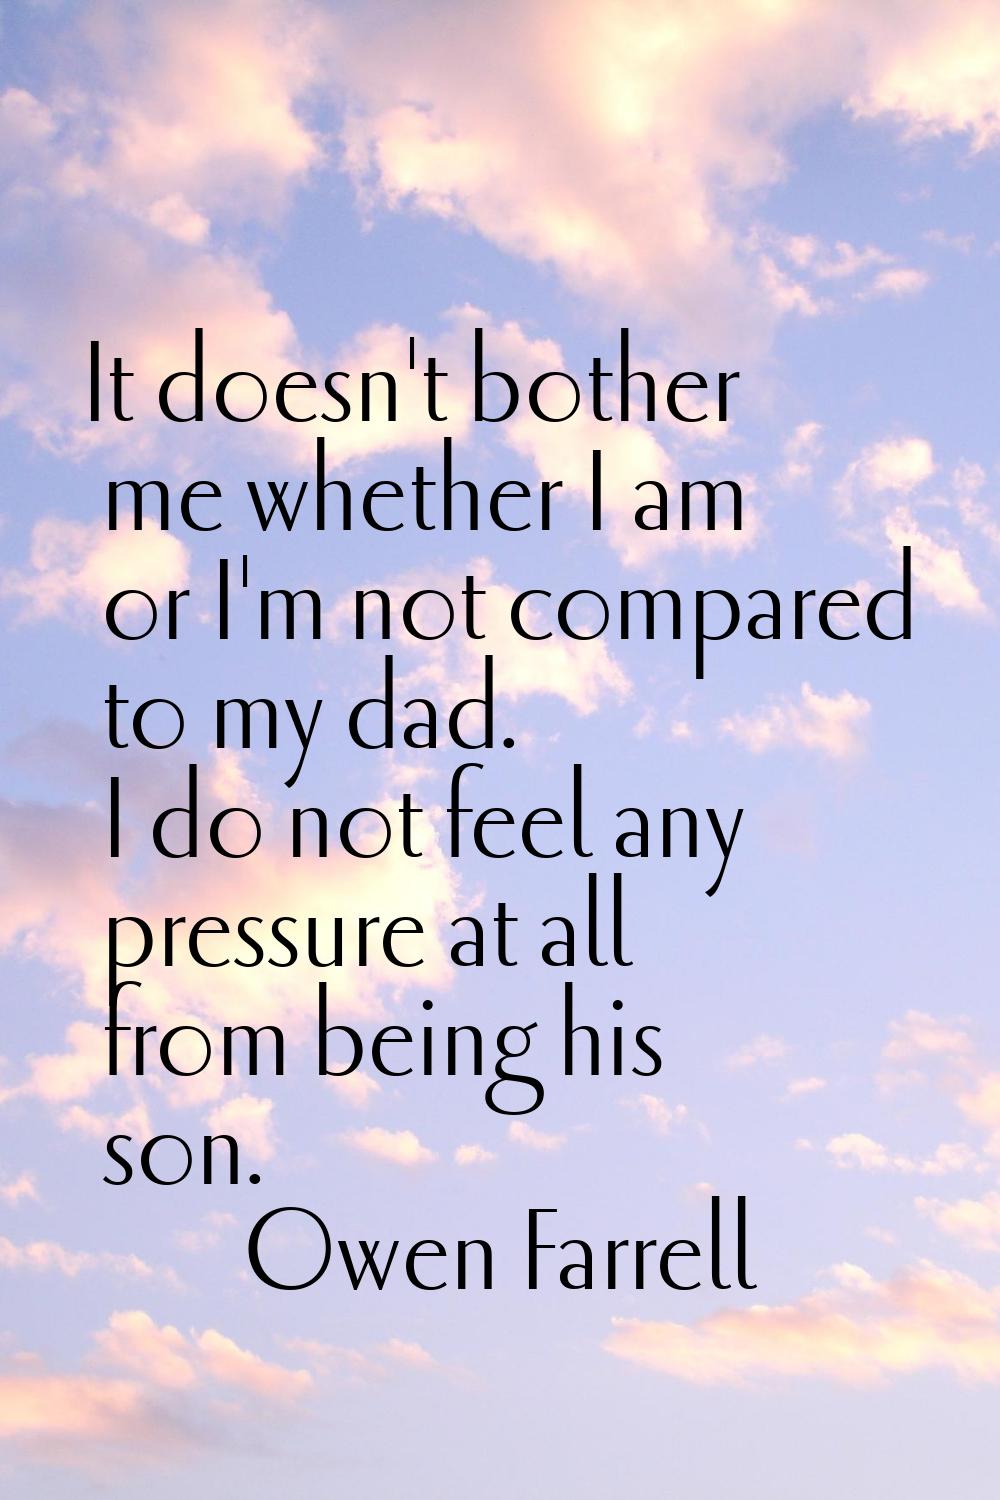 It doesn't bother me whether I am or I'm not compared to my dad. I do not feel any pressure at all 